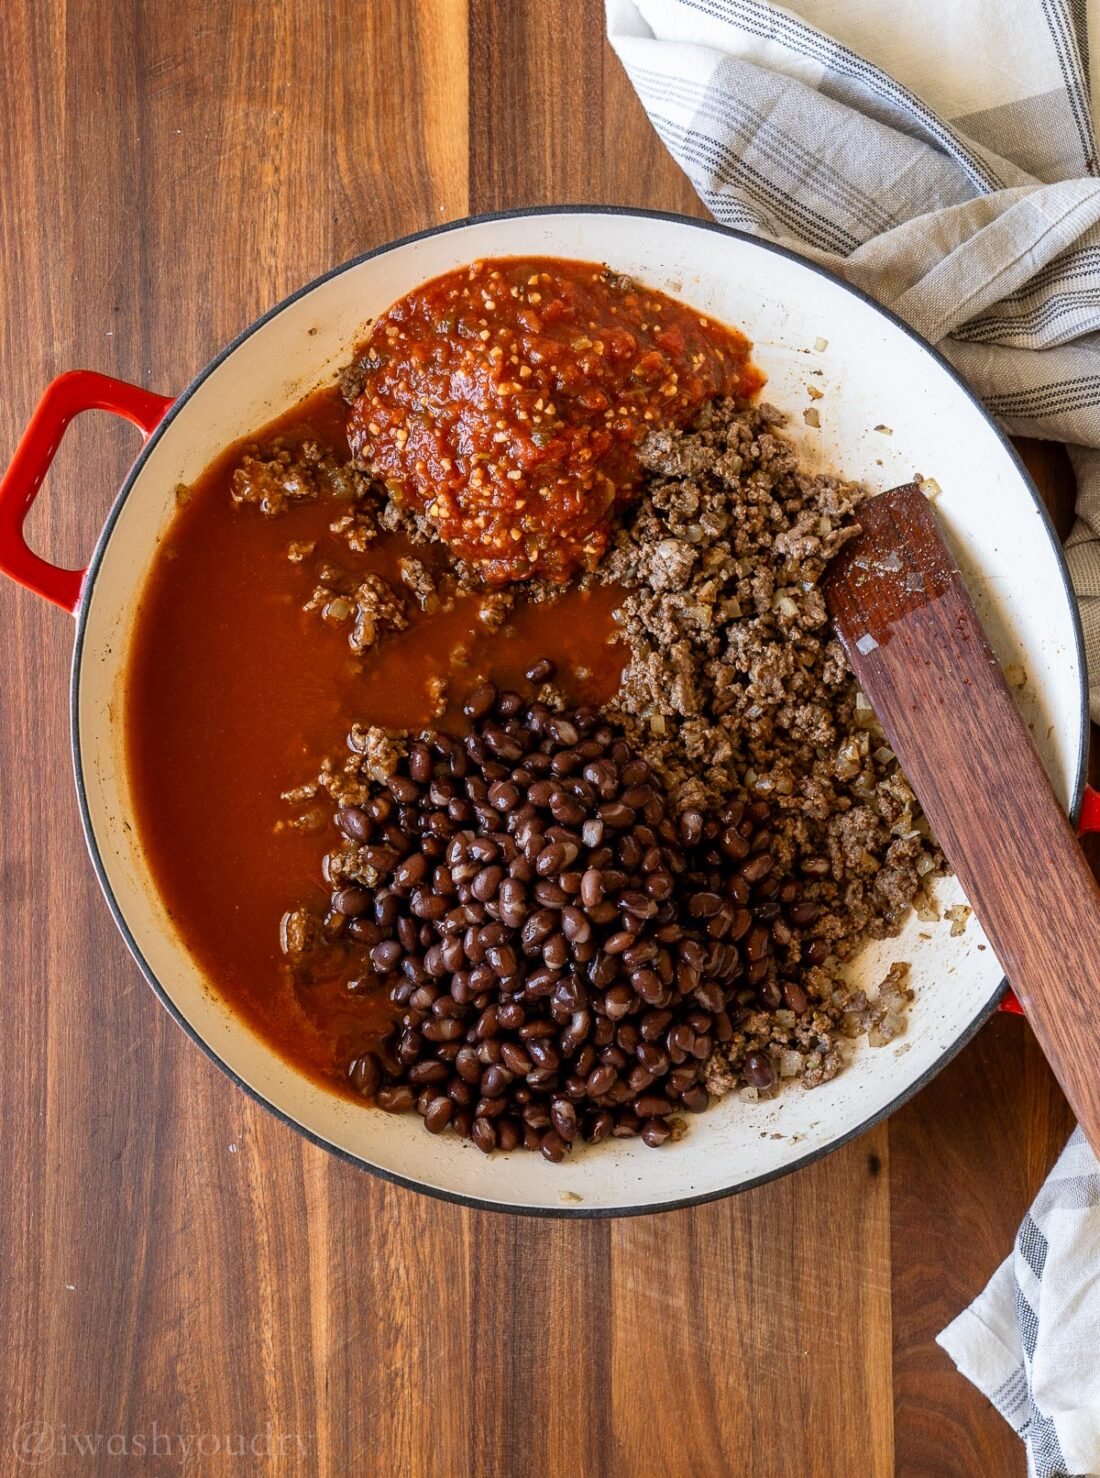 Skillet filled with sauces, black beans and ground beef with wooden spoon.